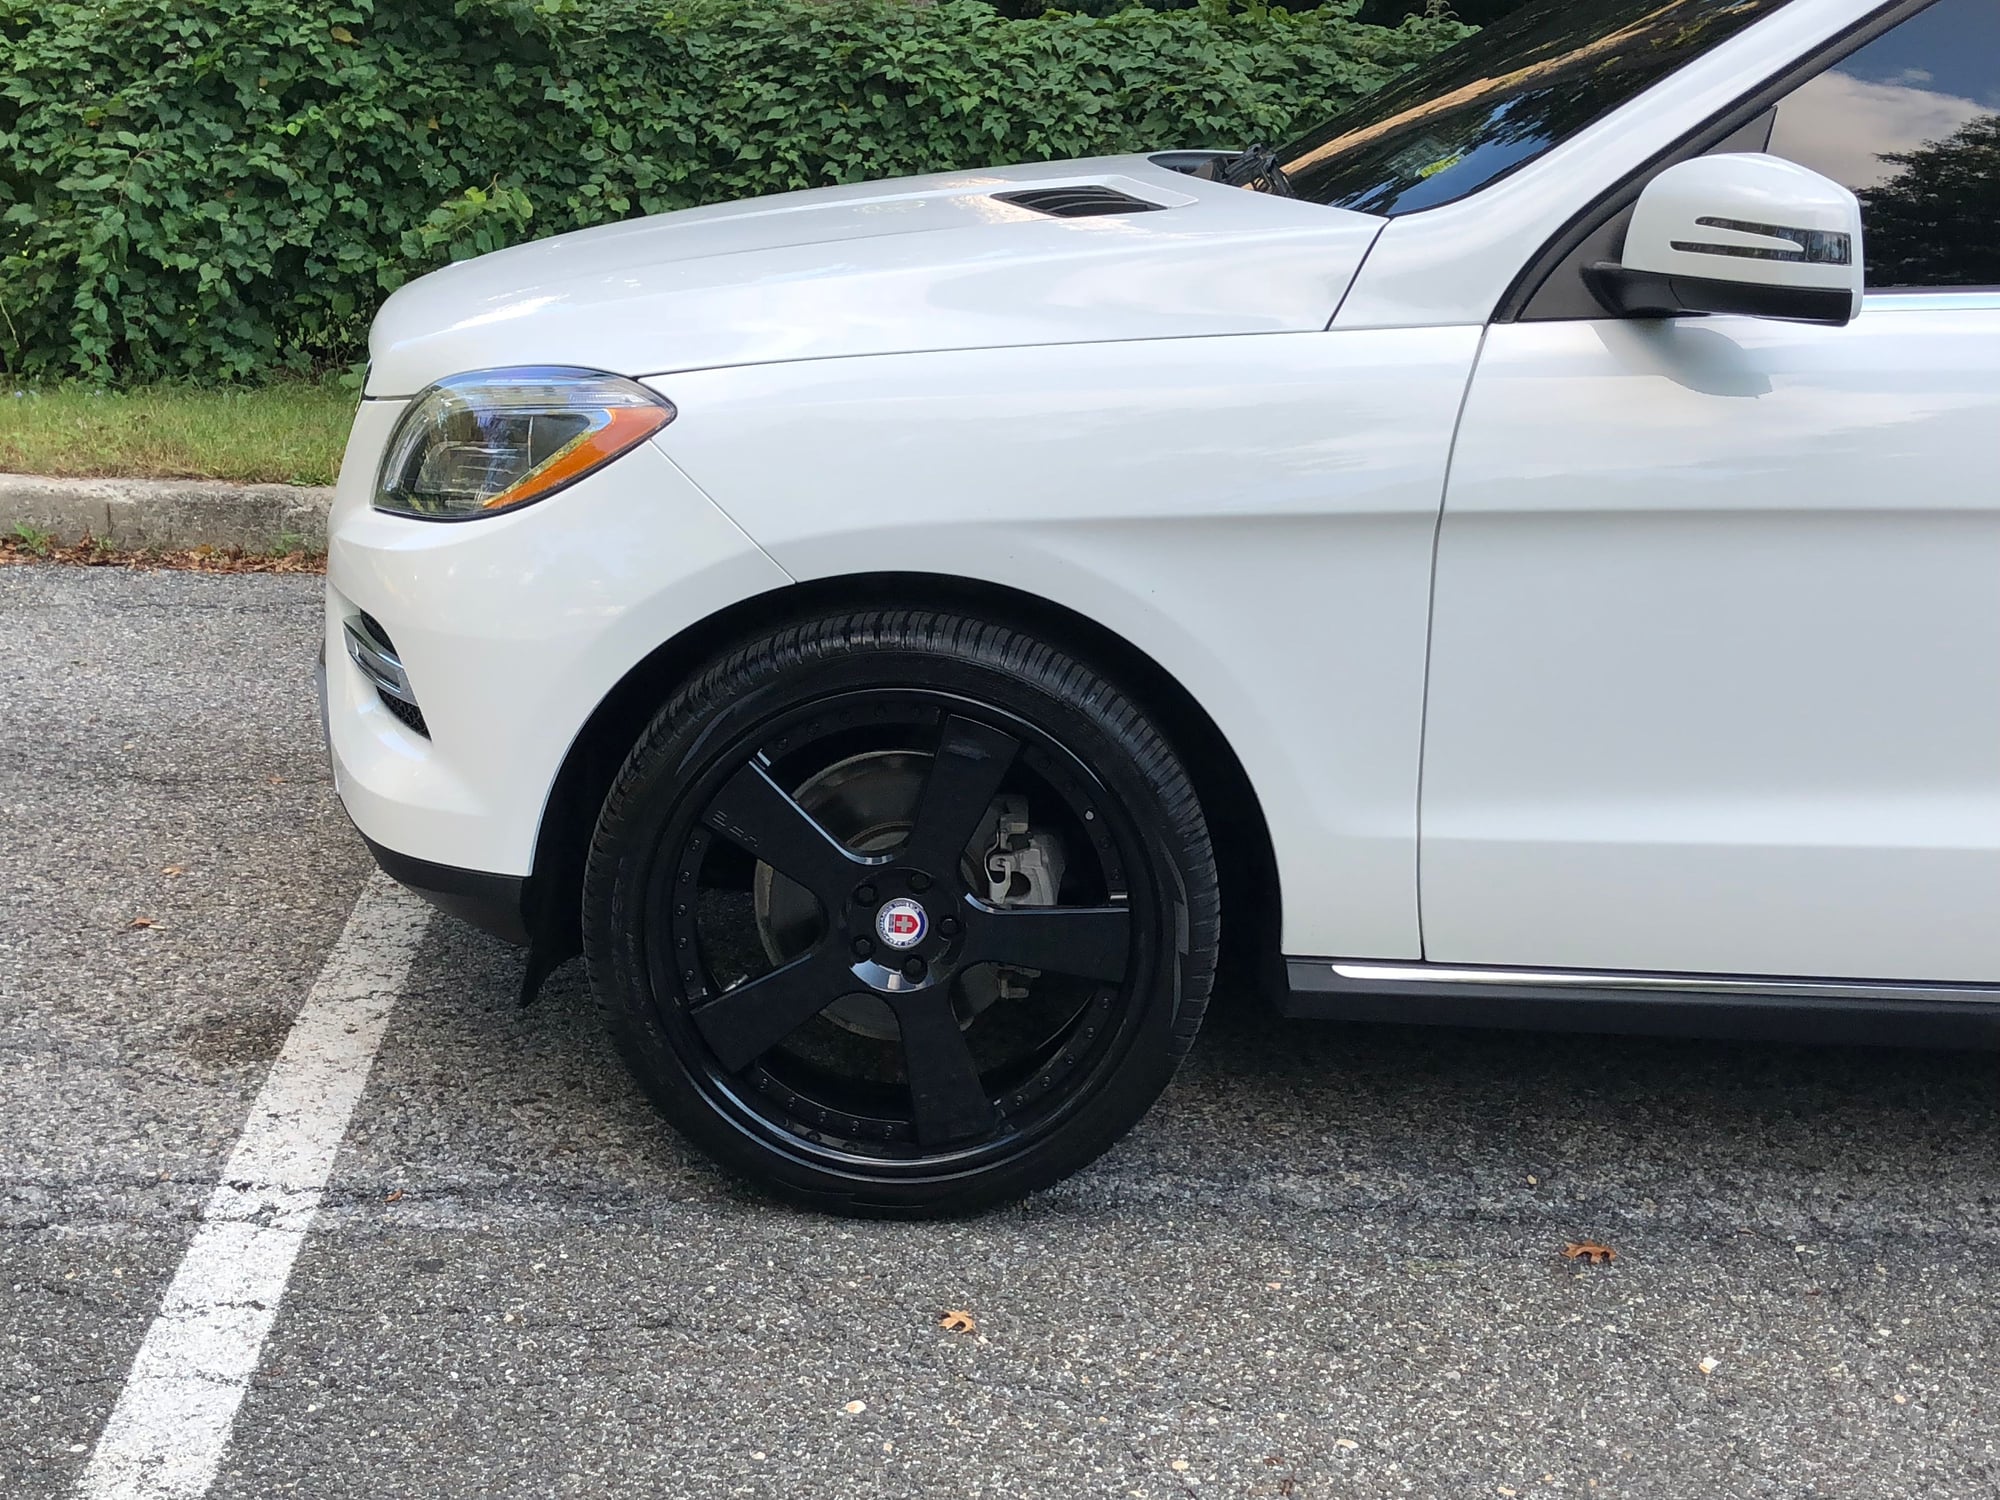 Wheels and Tires/Axles - 22x9 inch HRE 945 RL 265/35/22 all season tires TPMS - Used - 2012 to 2015 Mercedes-Benz ML350 - Yonkers, NY 10710, United States